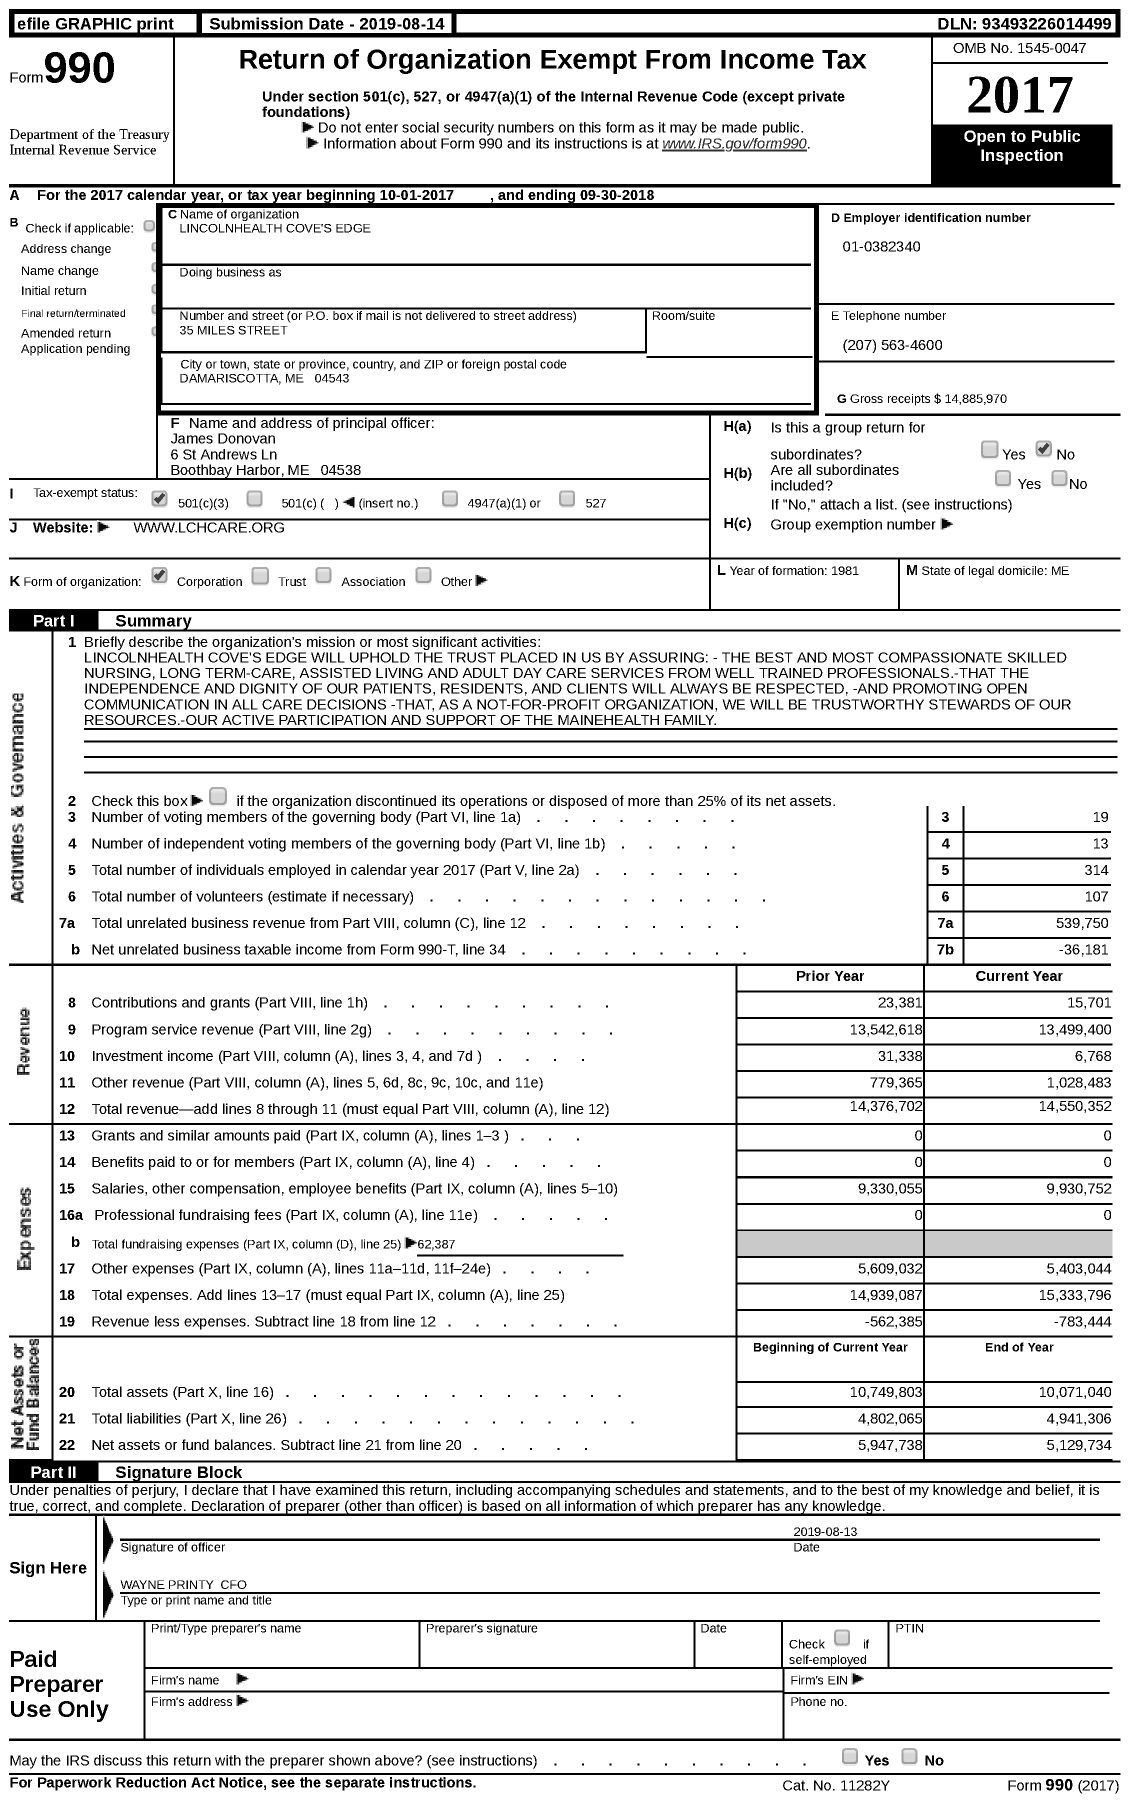 Image of first page of 2017 Form 990 for Lincolnhealth Cove's Edge